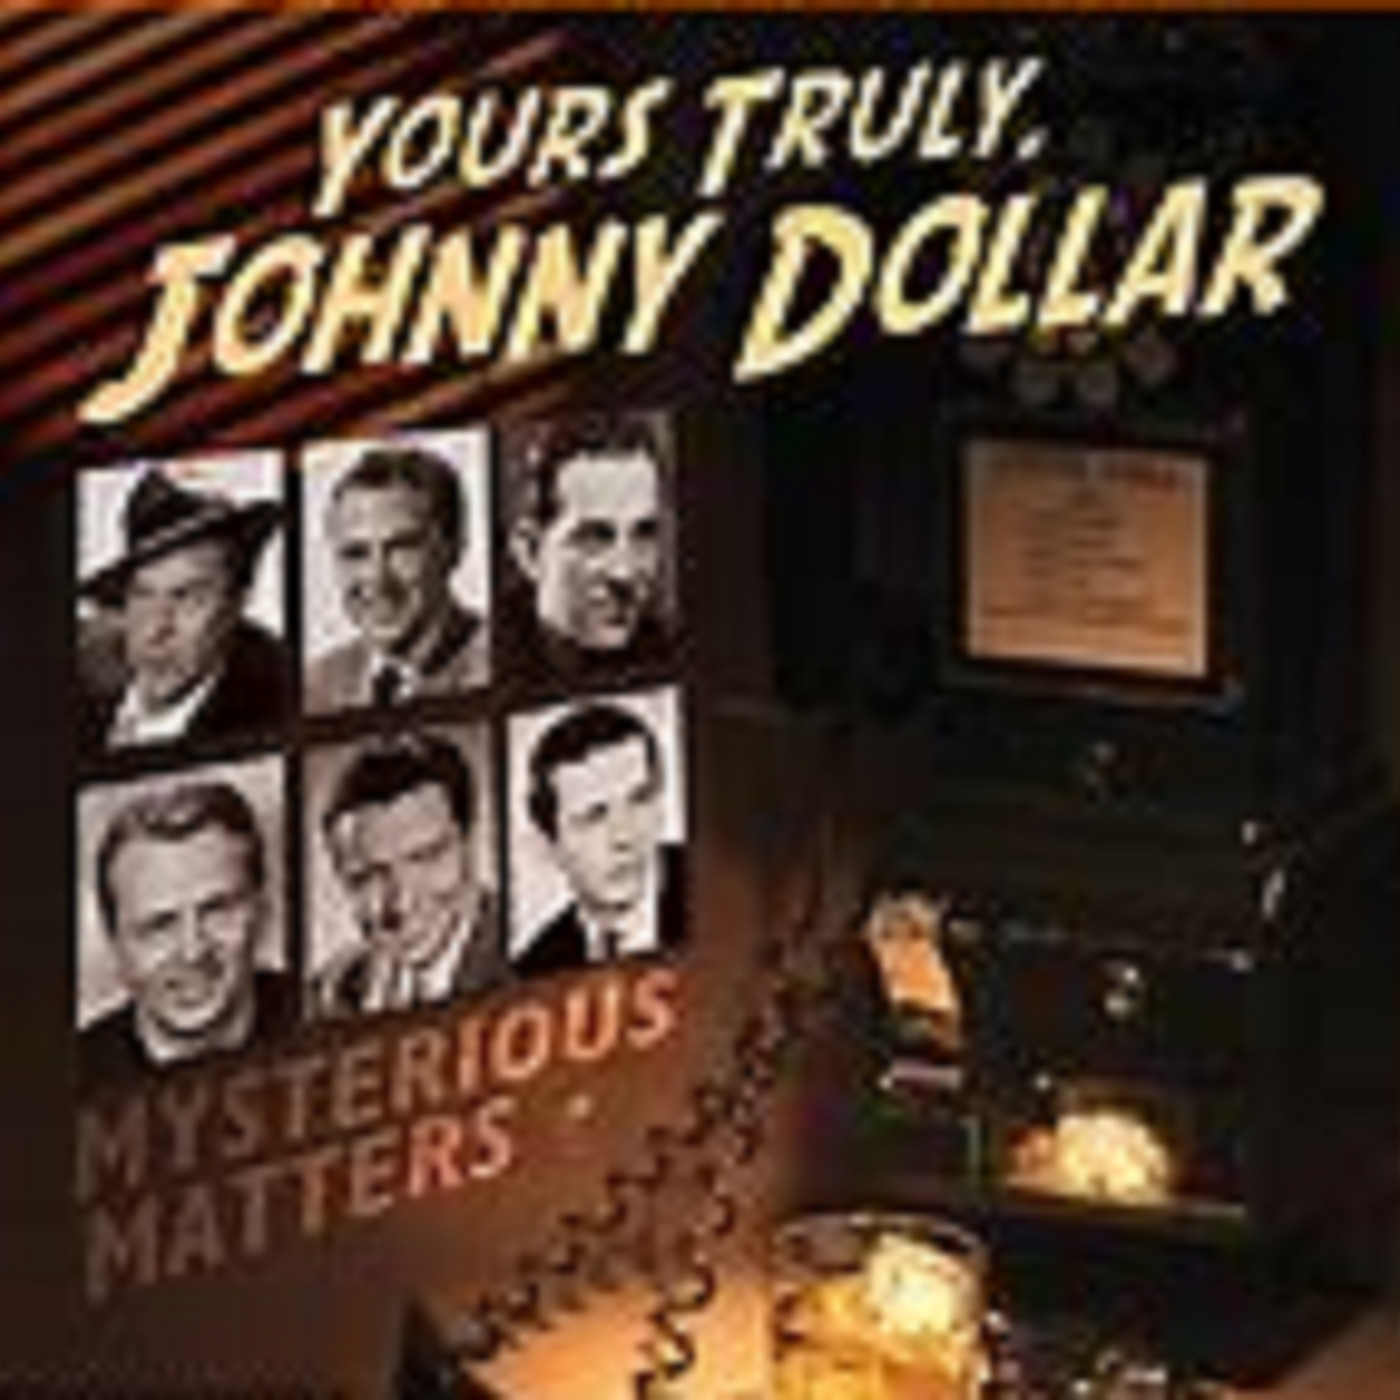 Yours Truly, Johnny Dollar - 040162, episode 785 - The Blue Rock Matter